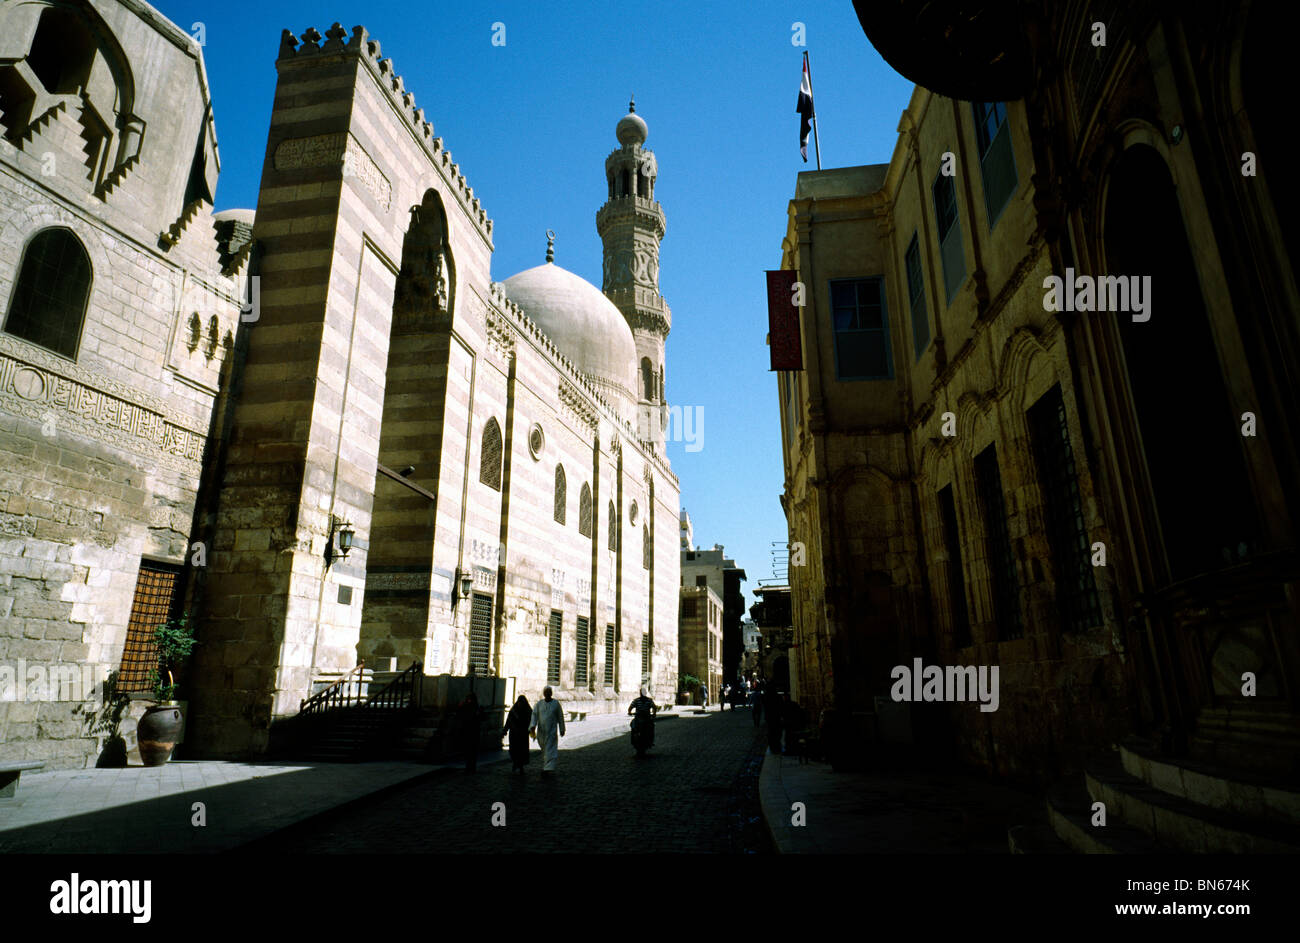 View of Sharia al-Muizz in Islamic Cairo with the Madrasah Khanqah of Sultan Barquq on the left next to the Qalaoun Complex. Stock Photo